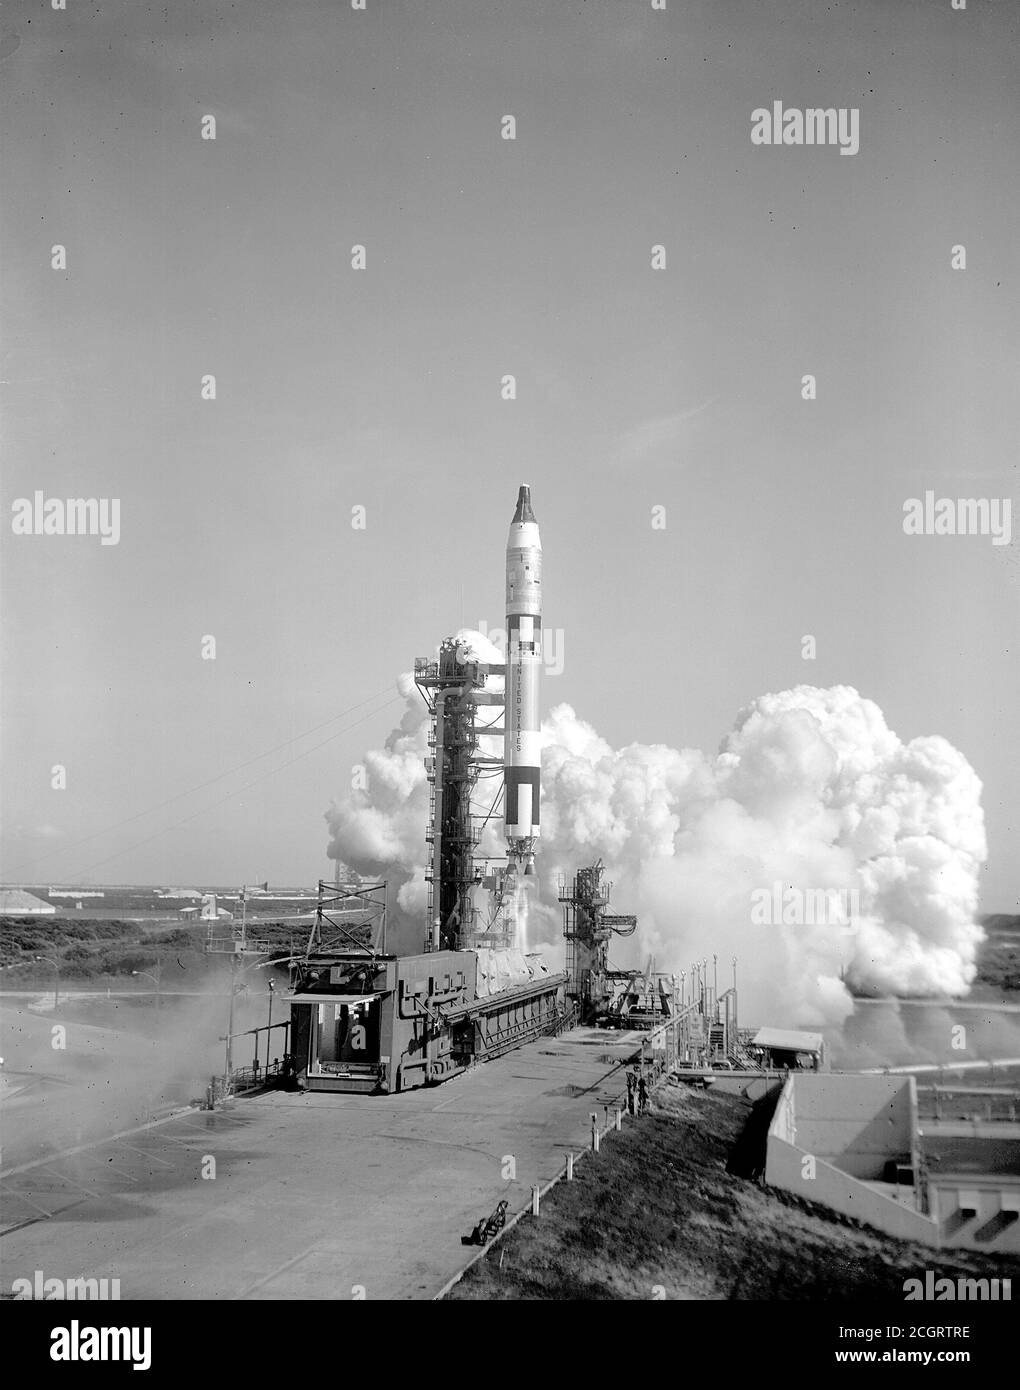 NASA launched the Gemini 5 spacecraft, August 21, 1965 at 0900 EST on a planned eight-day mission from Complex 19. Astronaut Gordon Cooper was the Command Pilot and Charles Conrad the Pilot. This was the longest manned spaceflight at the time. Stock Photo